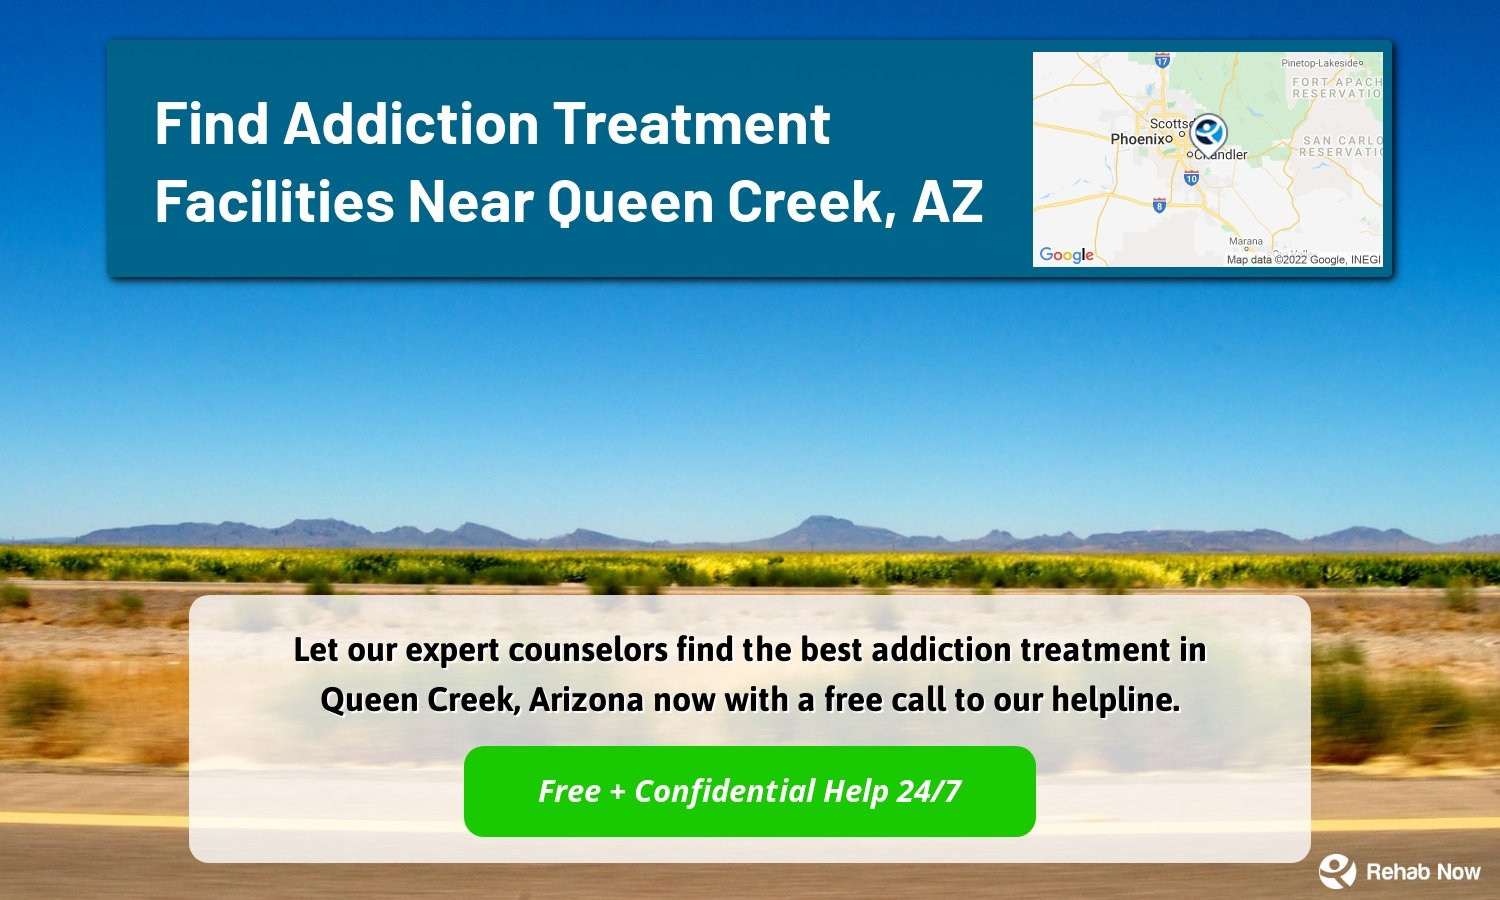 Let our expert counselors find the best addiction treatment in Queen Creek, Arizona now with a free call to our helpline.